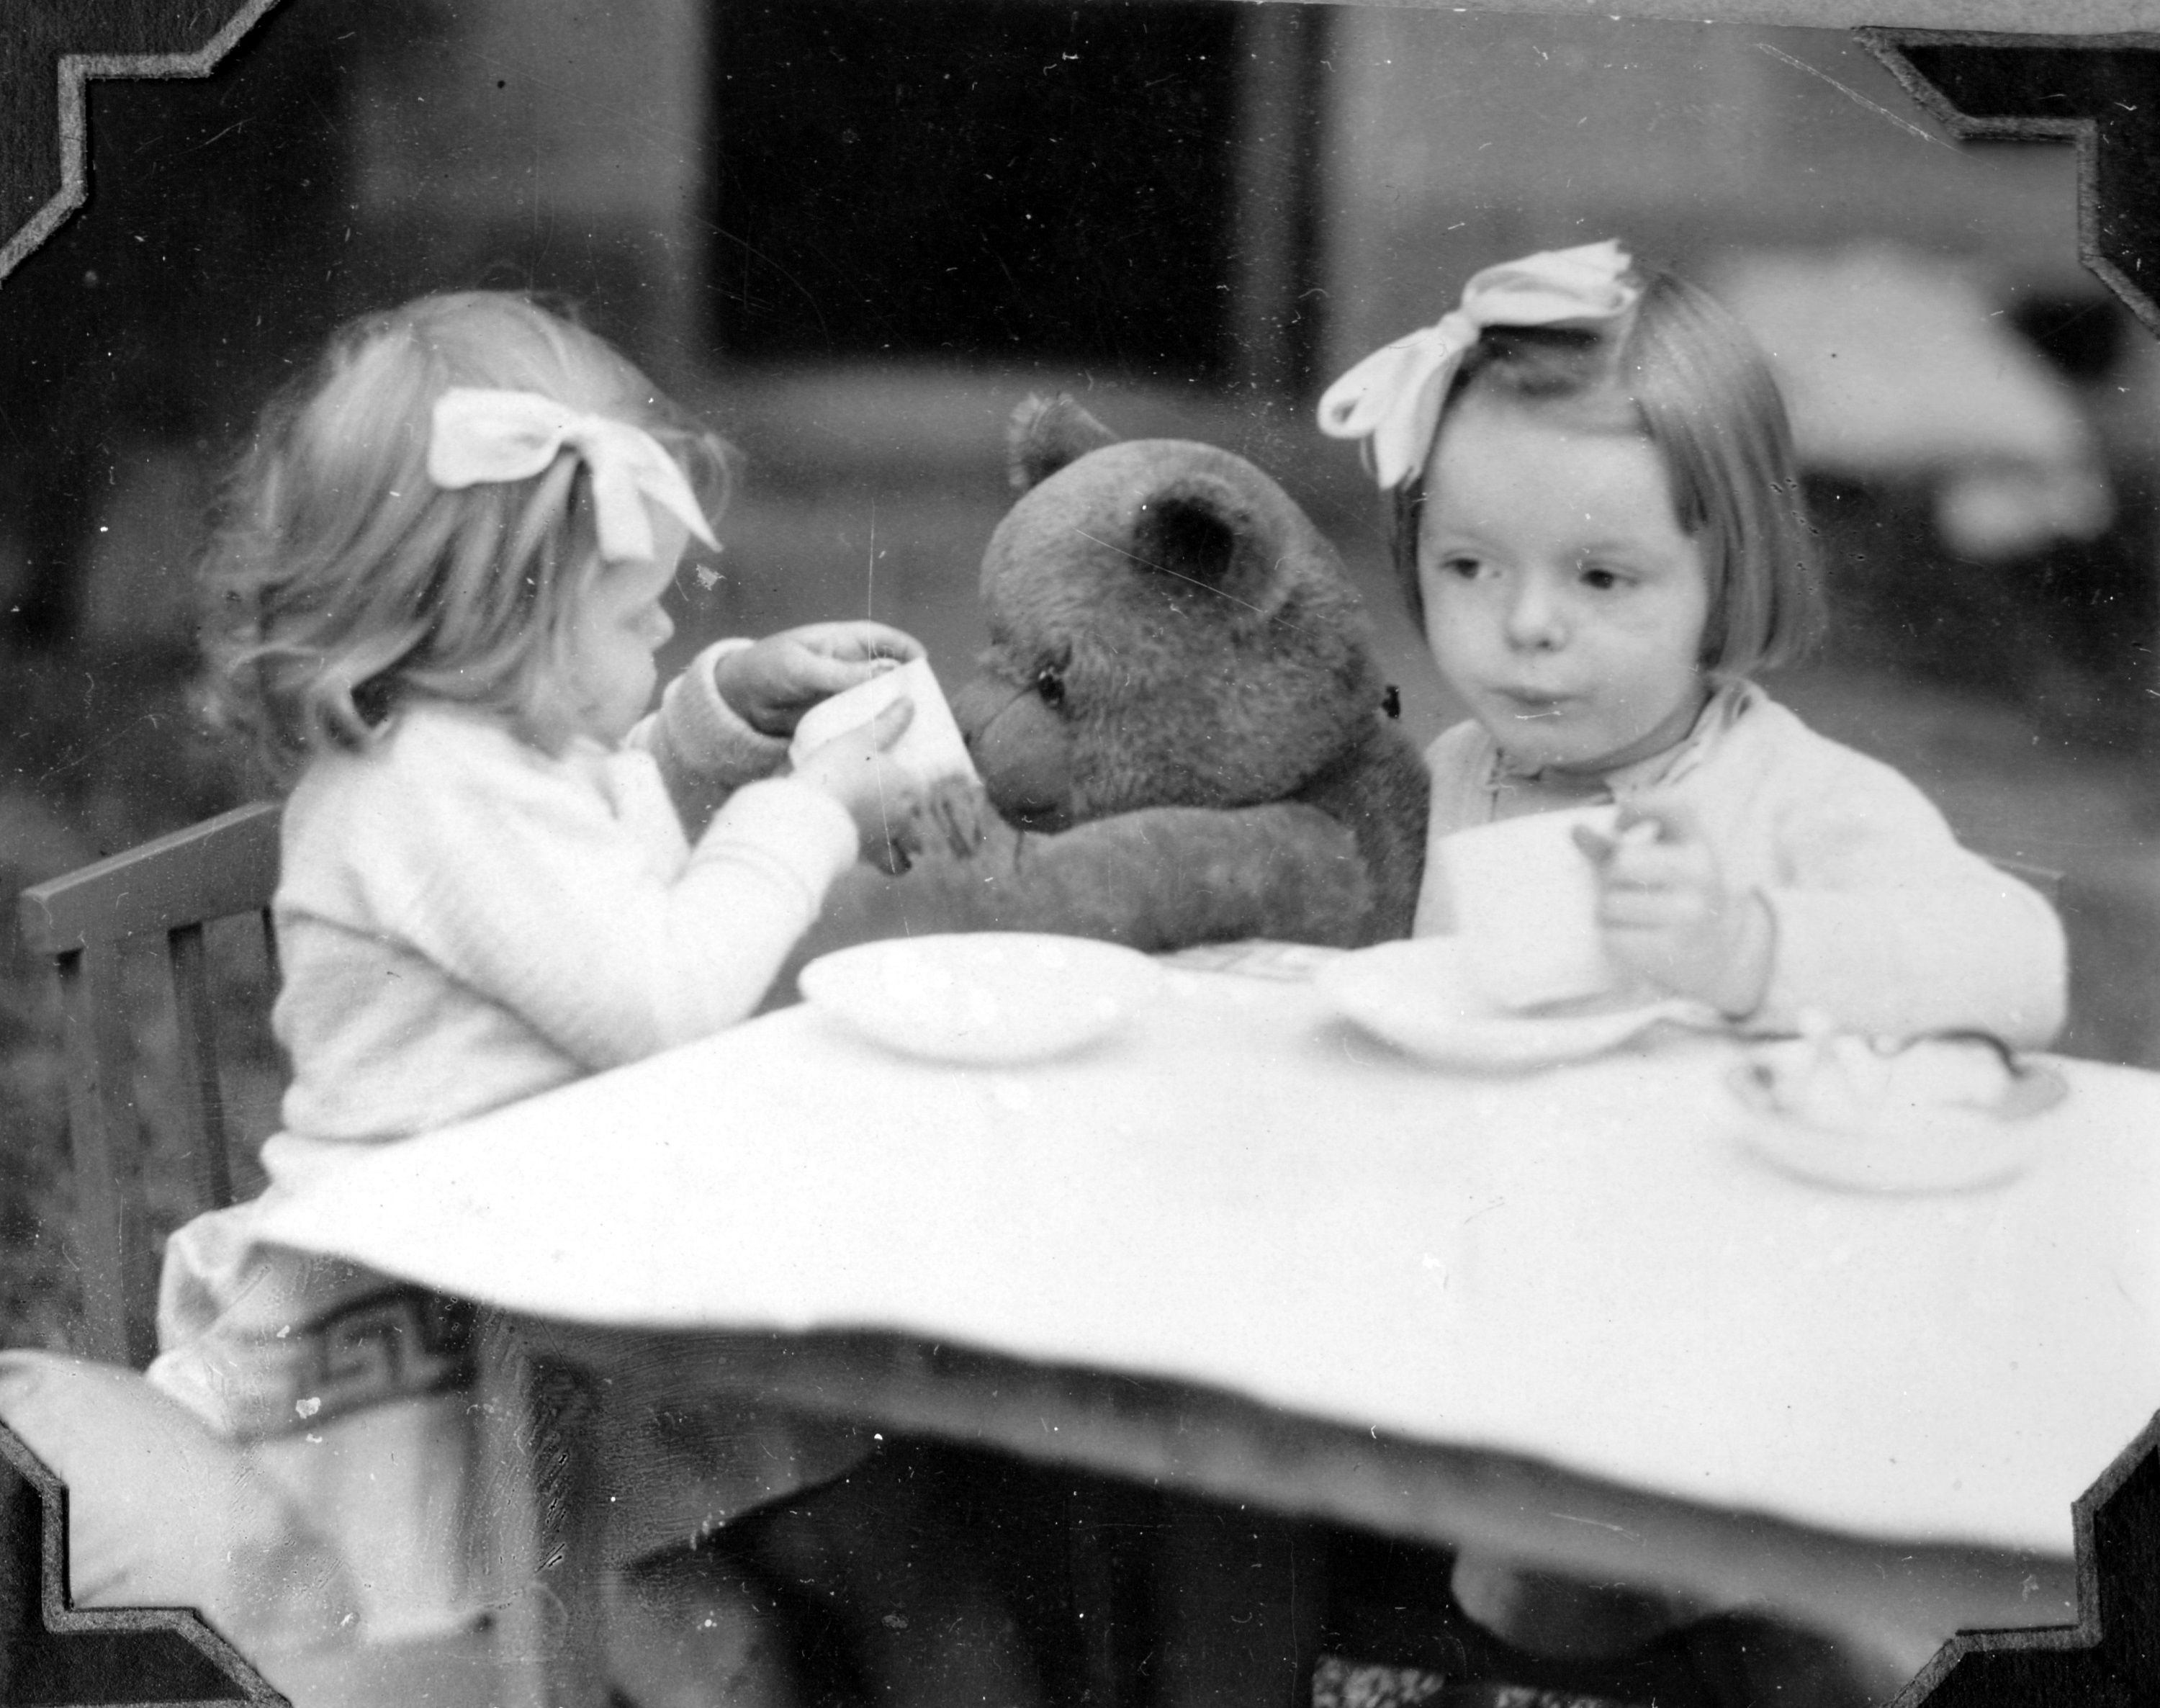 Two young children playing at a tea party. One child is offering tea to a teddy bear toy. 